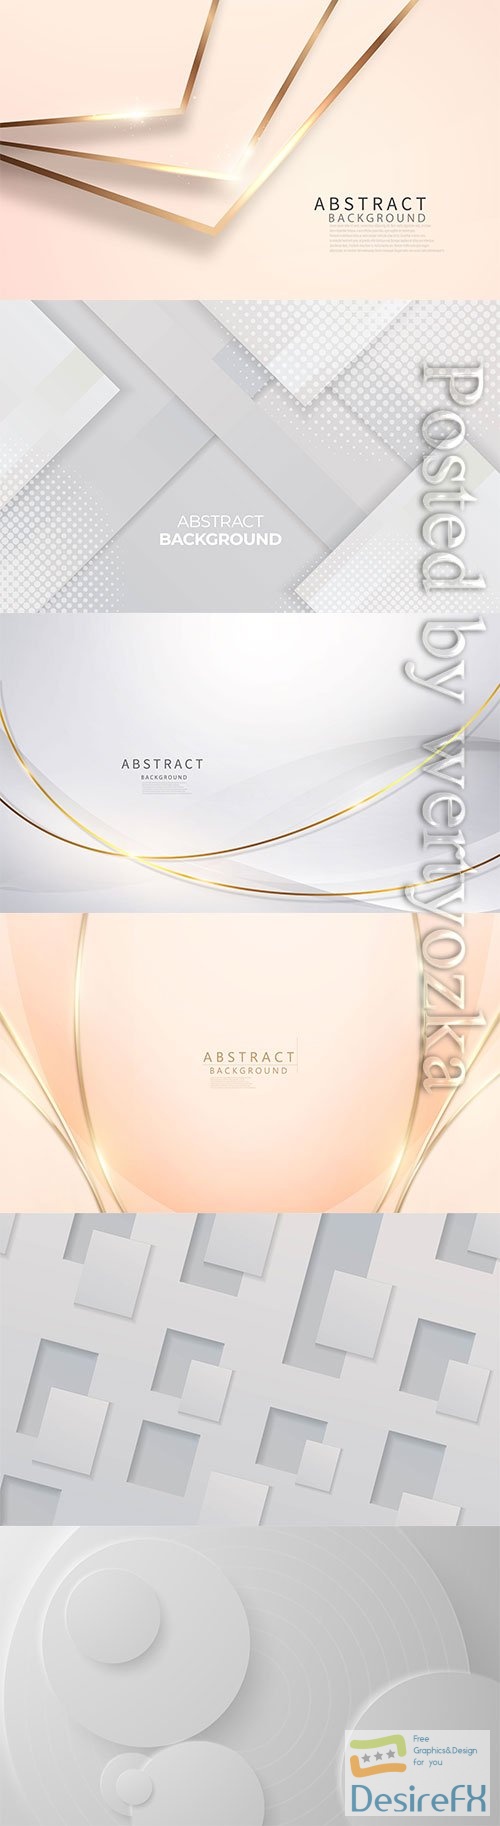 Light abstract backgrounds in vector